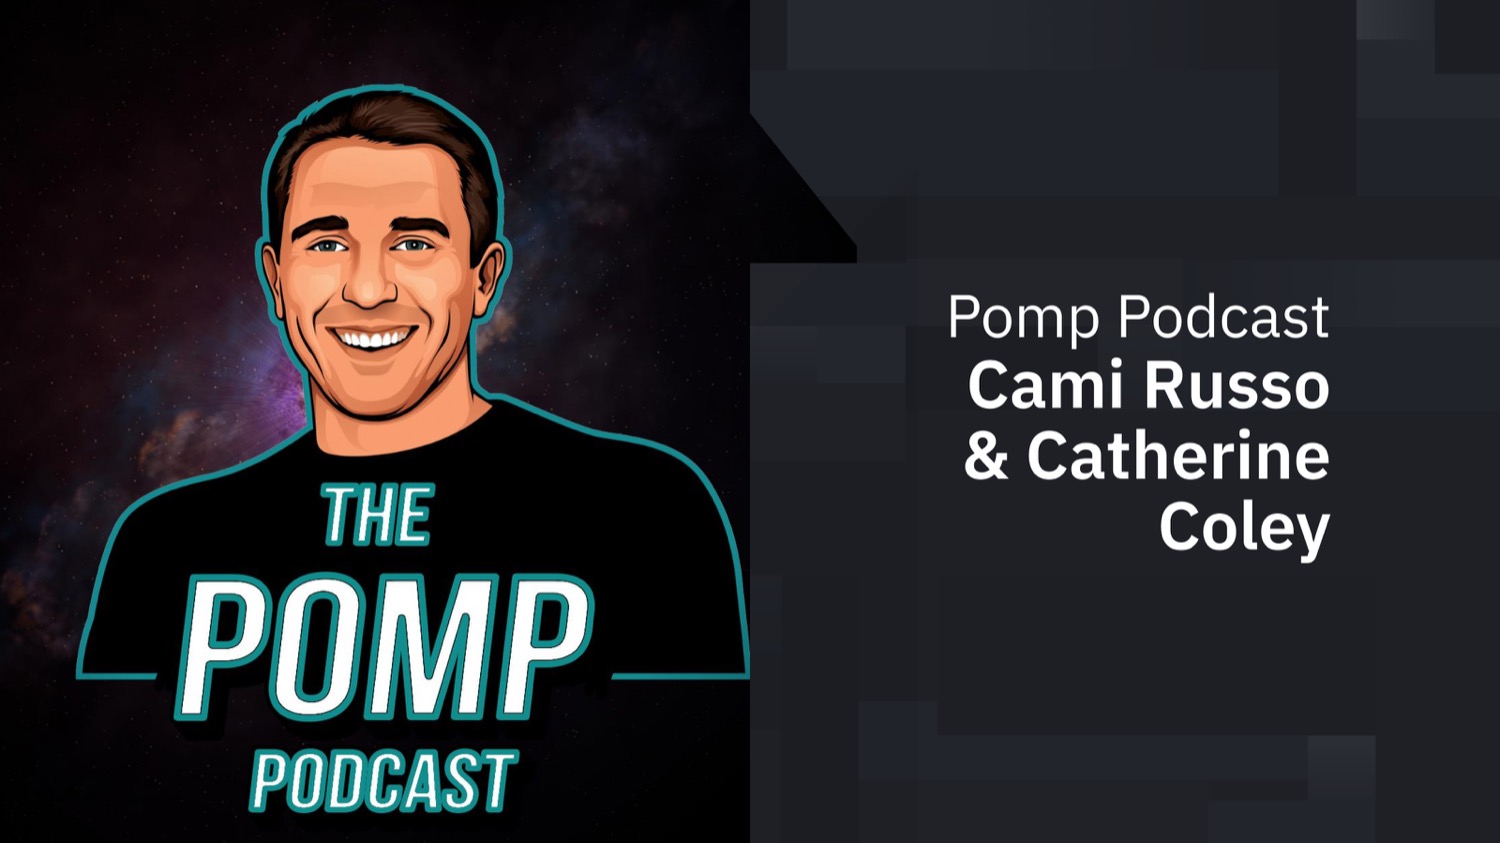 Pomp Podcast: Cami Russo and Catherine Coley